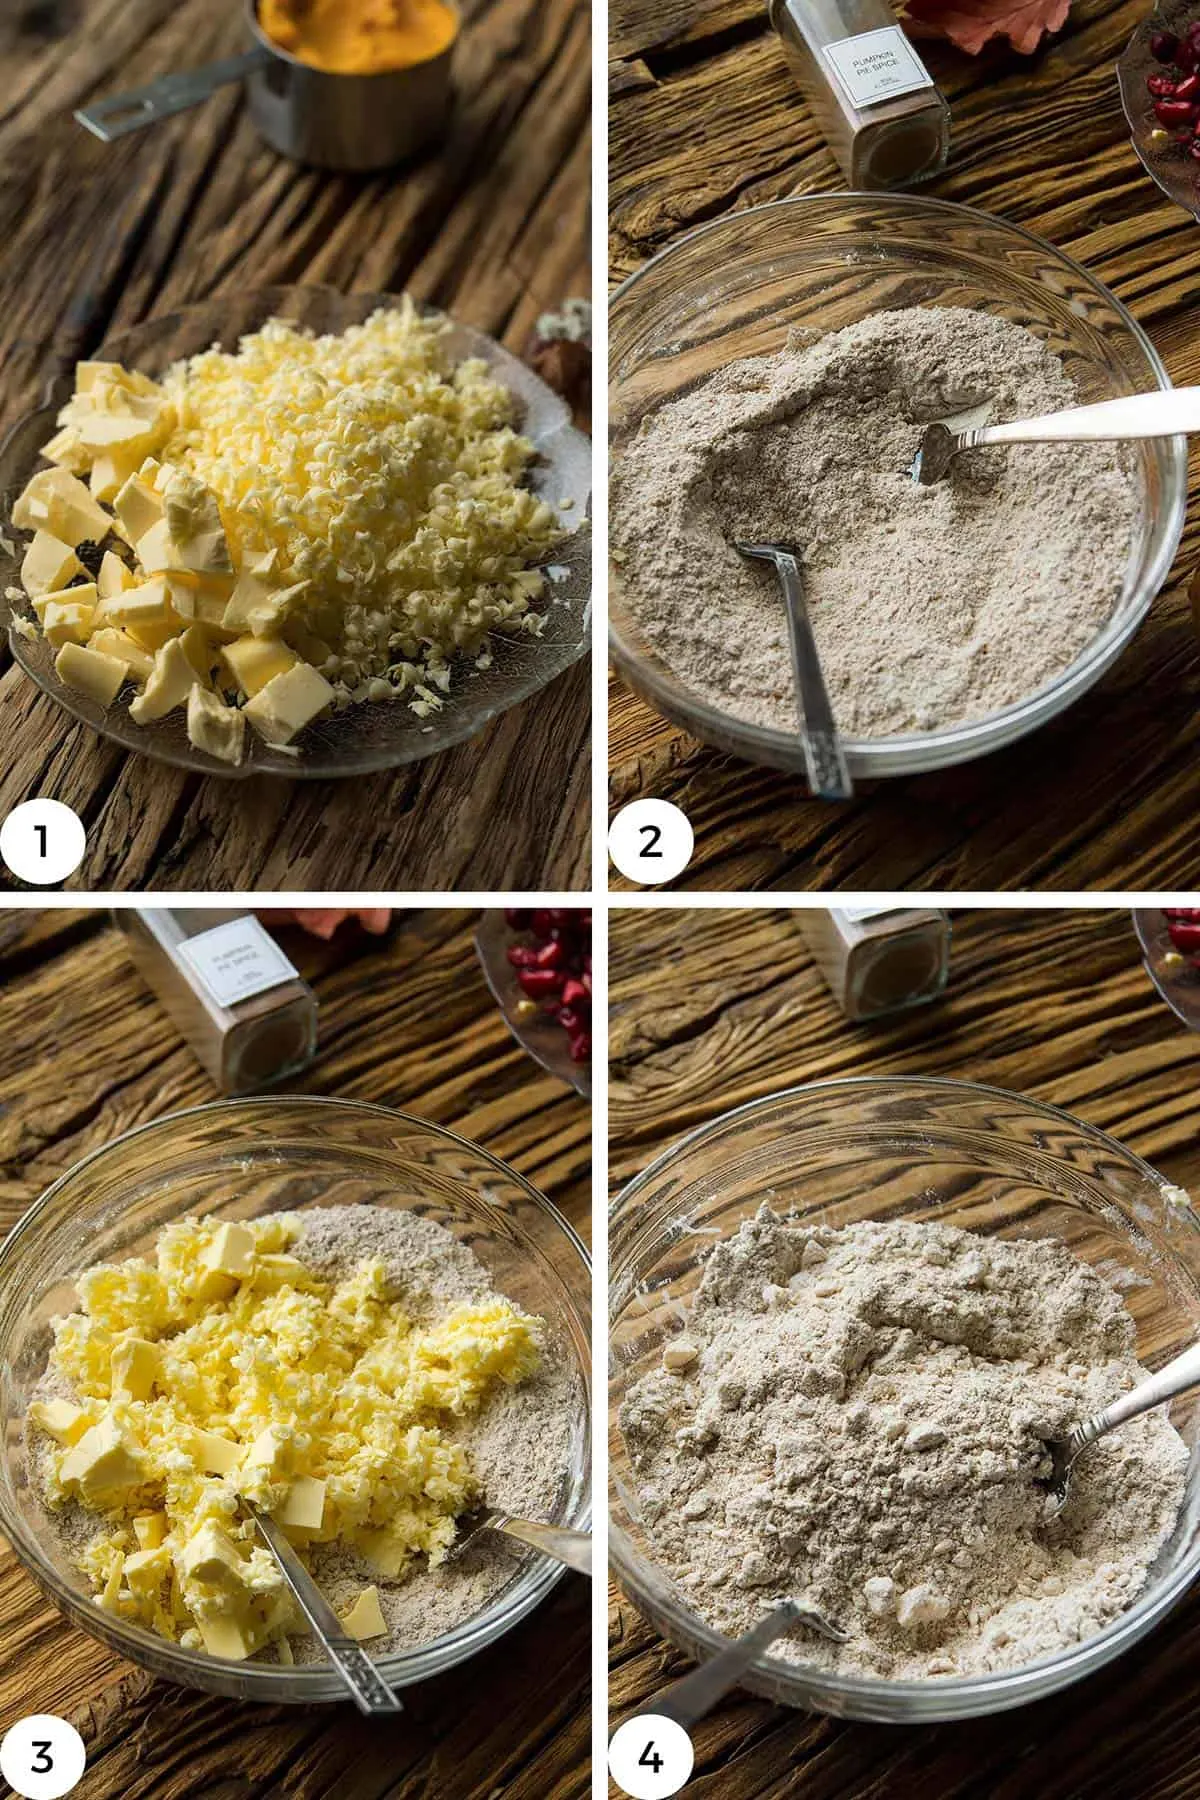 Steps to mix the butter into the flour.